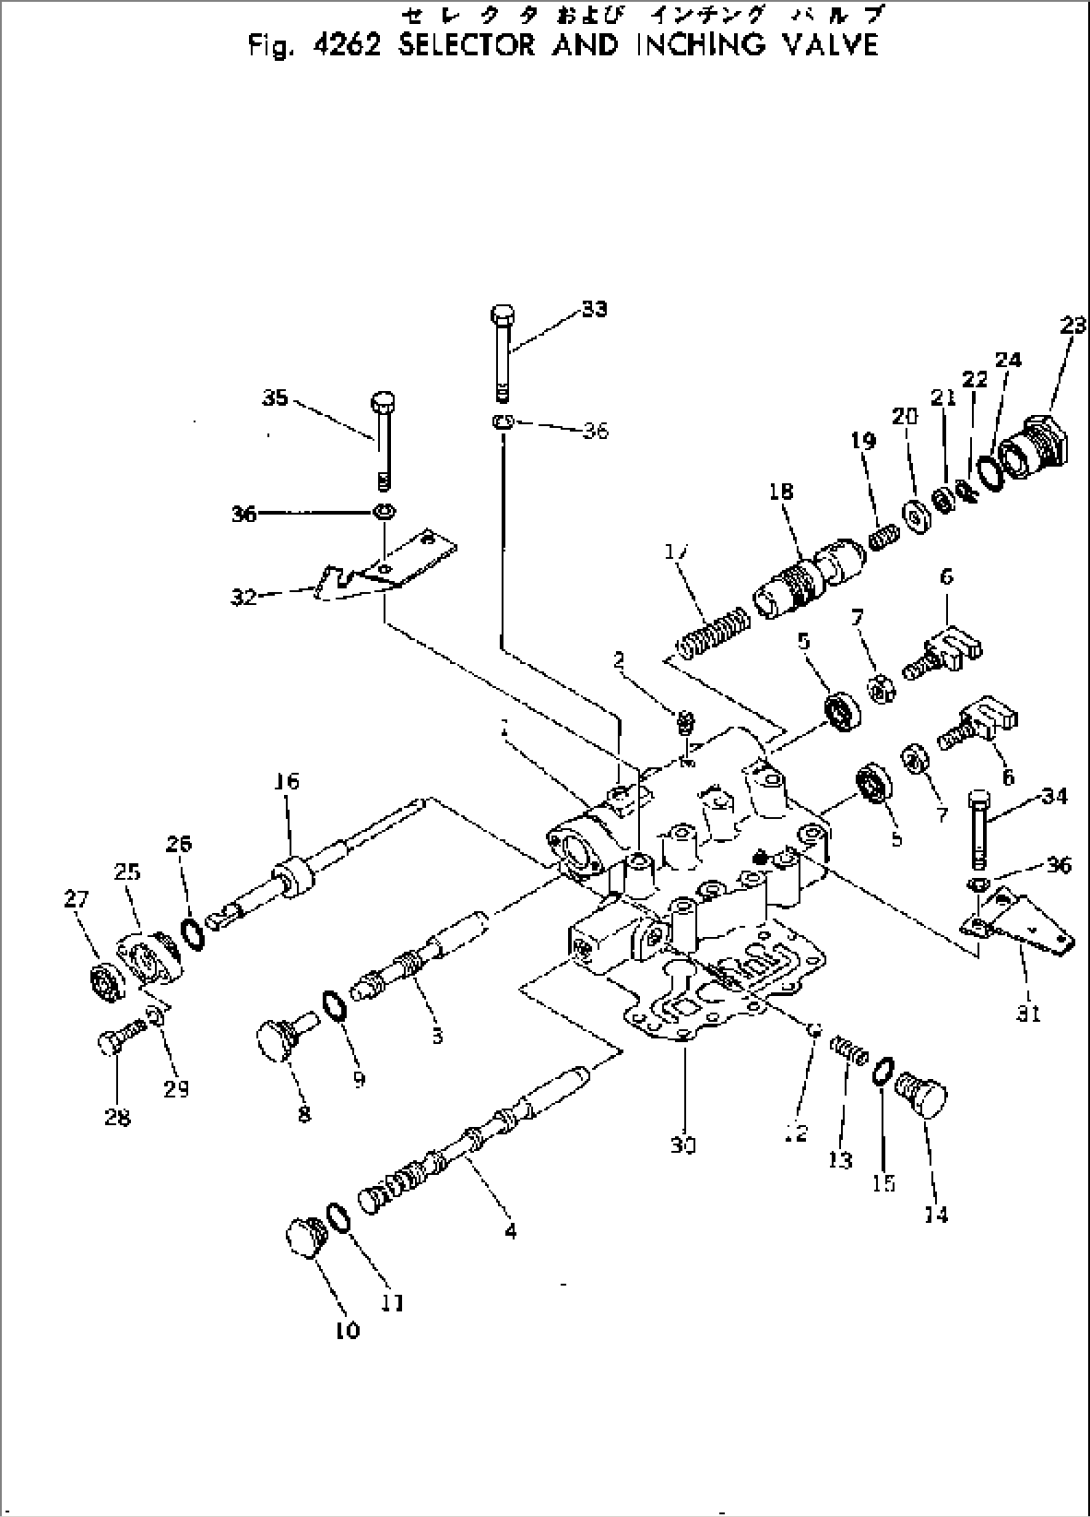 SELECTOR AND INCHING VALVE